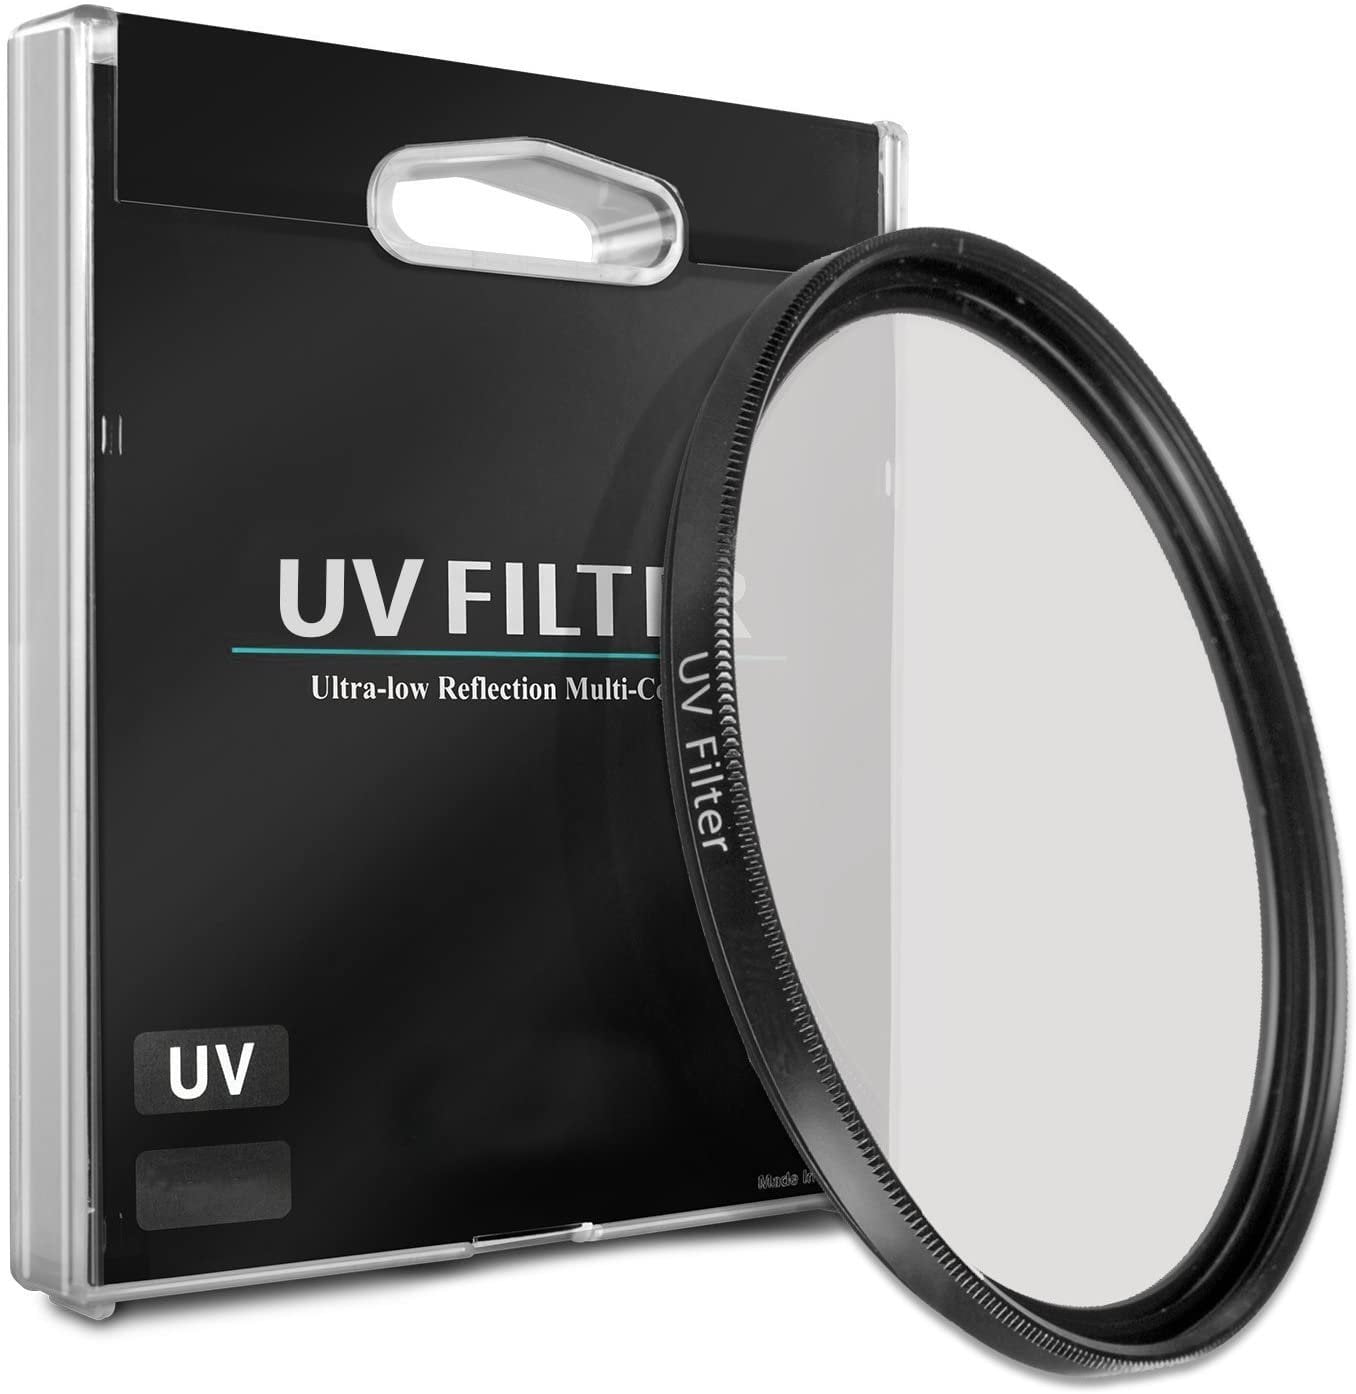 EZ-1250 Universal Protective UV Filter 52mm for Olympus 12-50 mm 3.5-6.3 ED EZ 